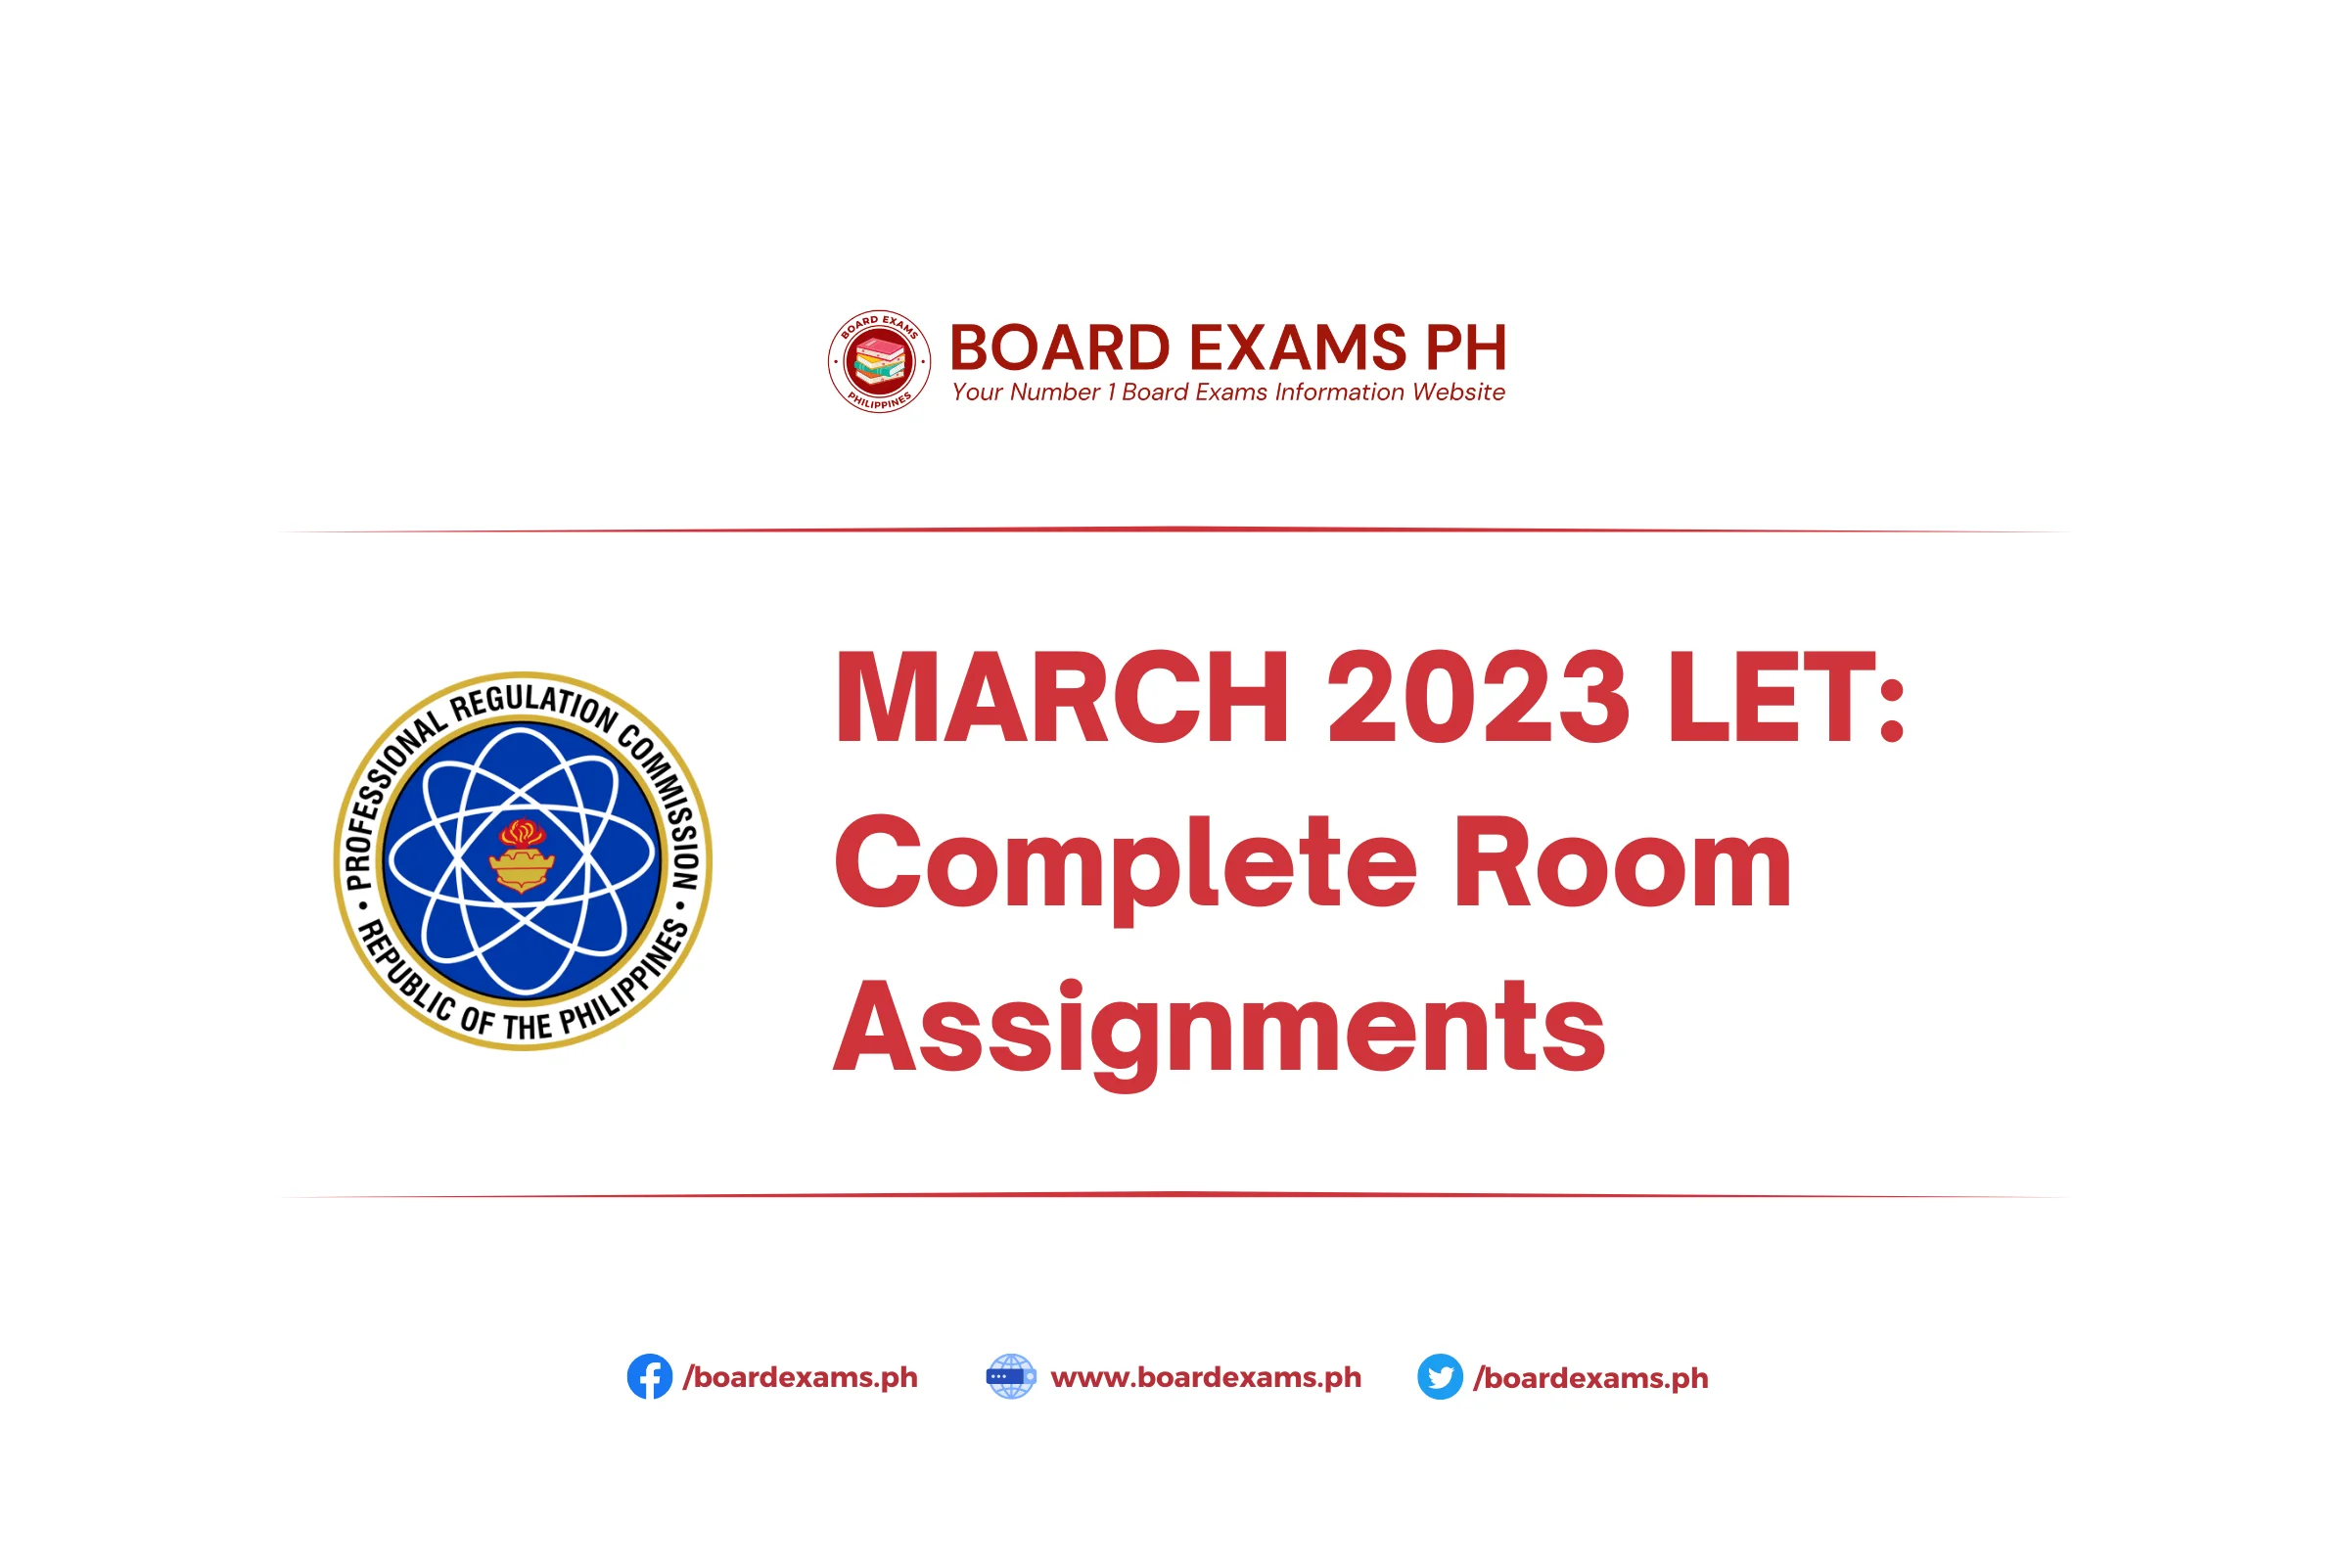 room assignment let march 2023 zamboanga